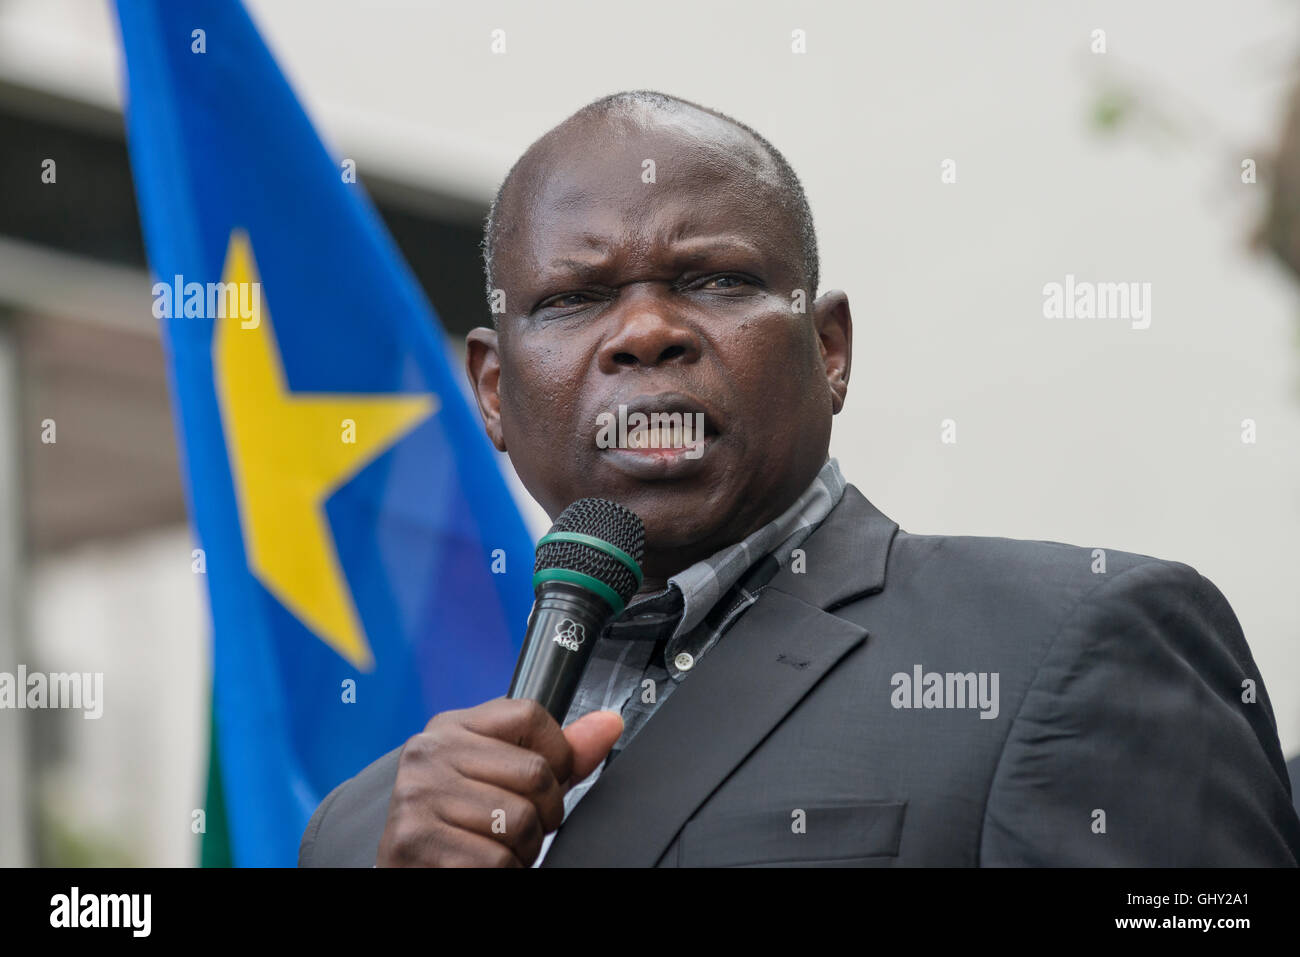 New York, USA. 11th August, 2016. Pagan Amum, former Secretary General of the ruling Sudan People's Liberation Movement (SPLM) and now leader of the SPLM-Former Detainees faction, speaks at the rally. Credit:  PACIFIC PRESS/Alamy Live News Stock Photo